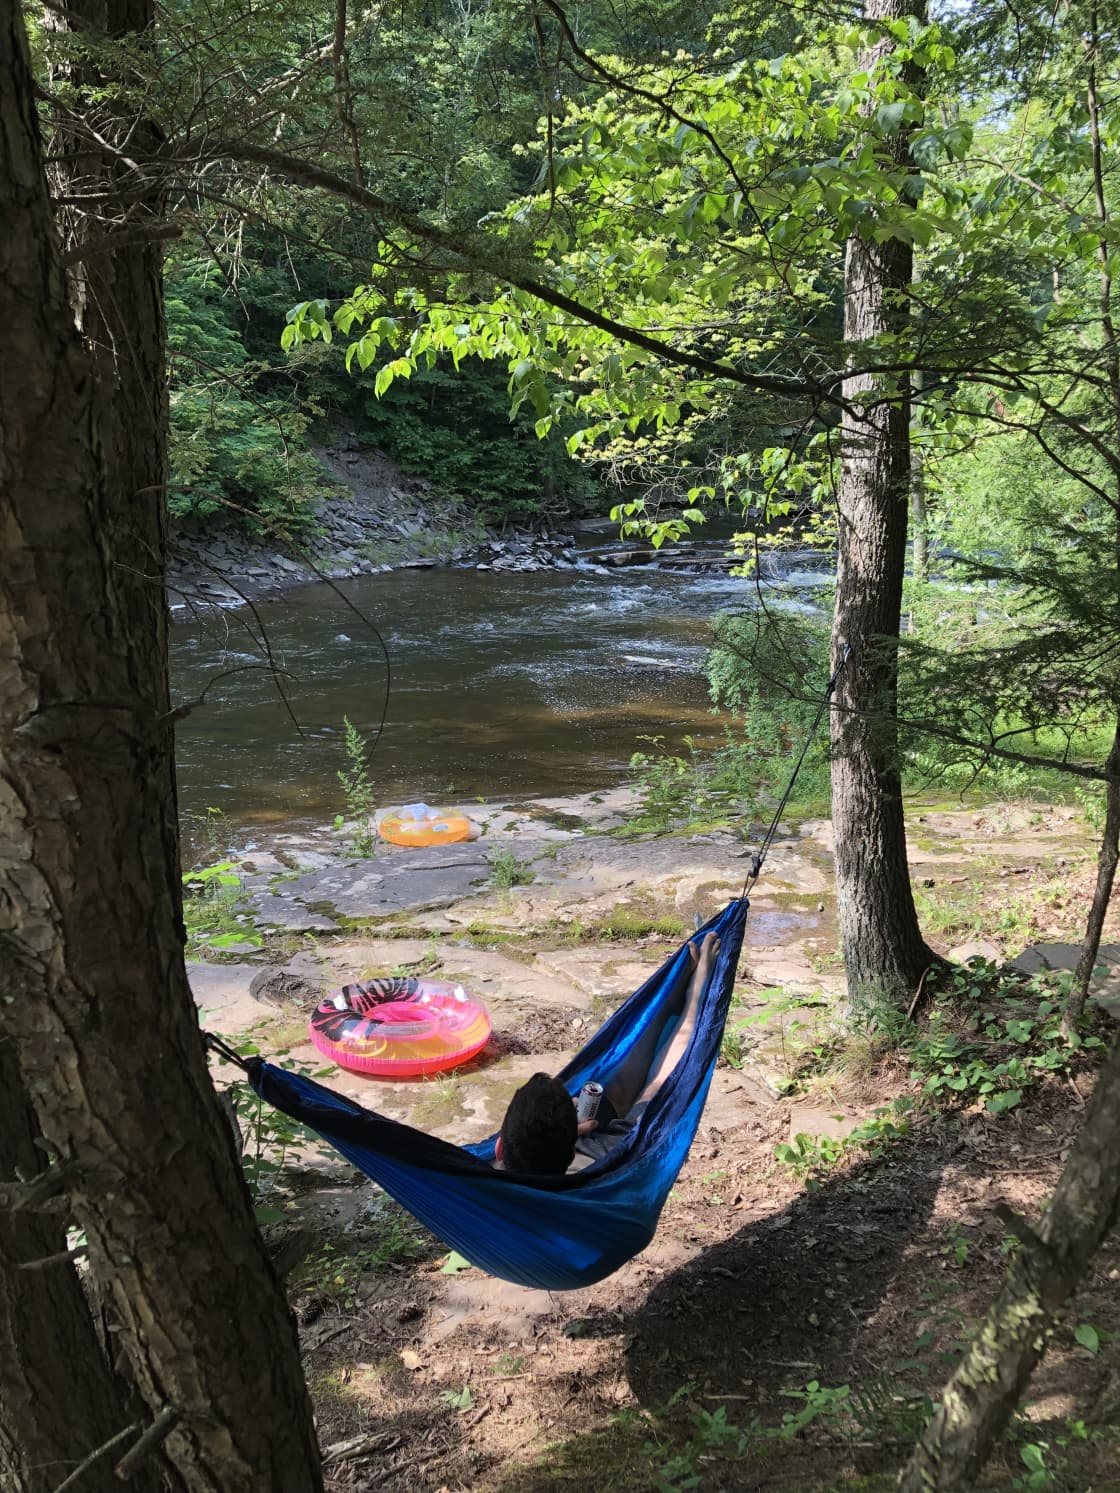 Camp was already set up with hammock hooks in the perfect location!